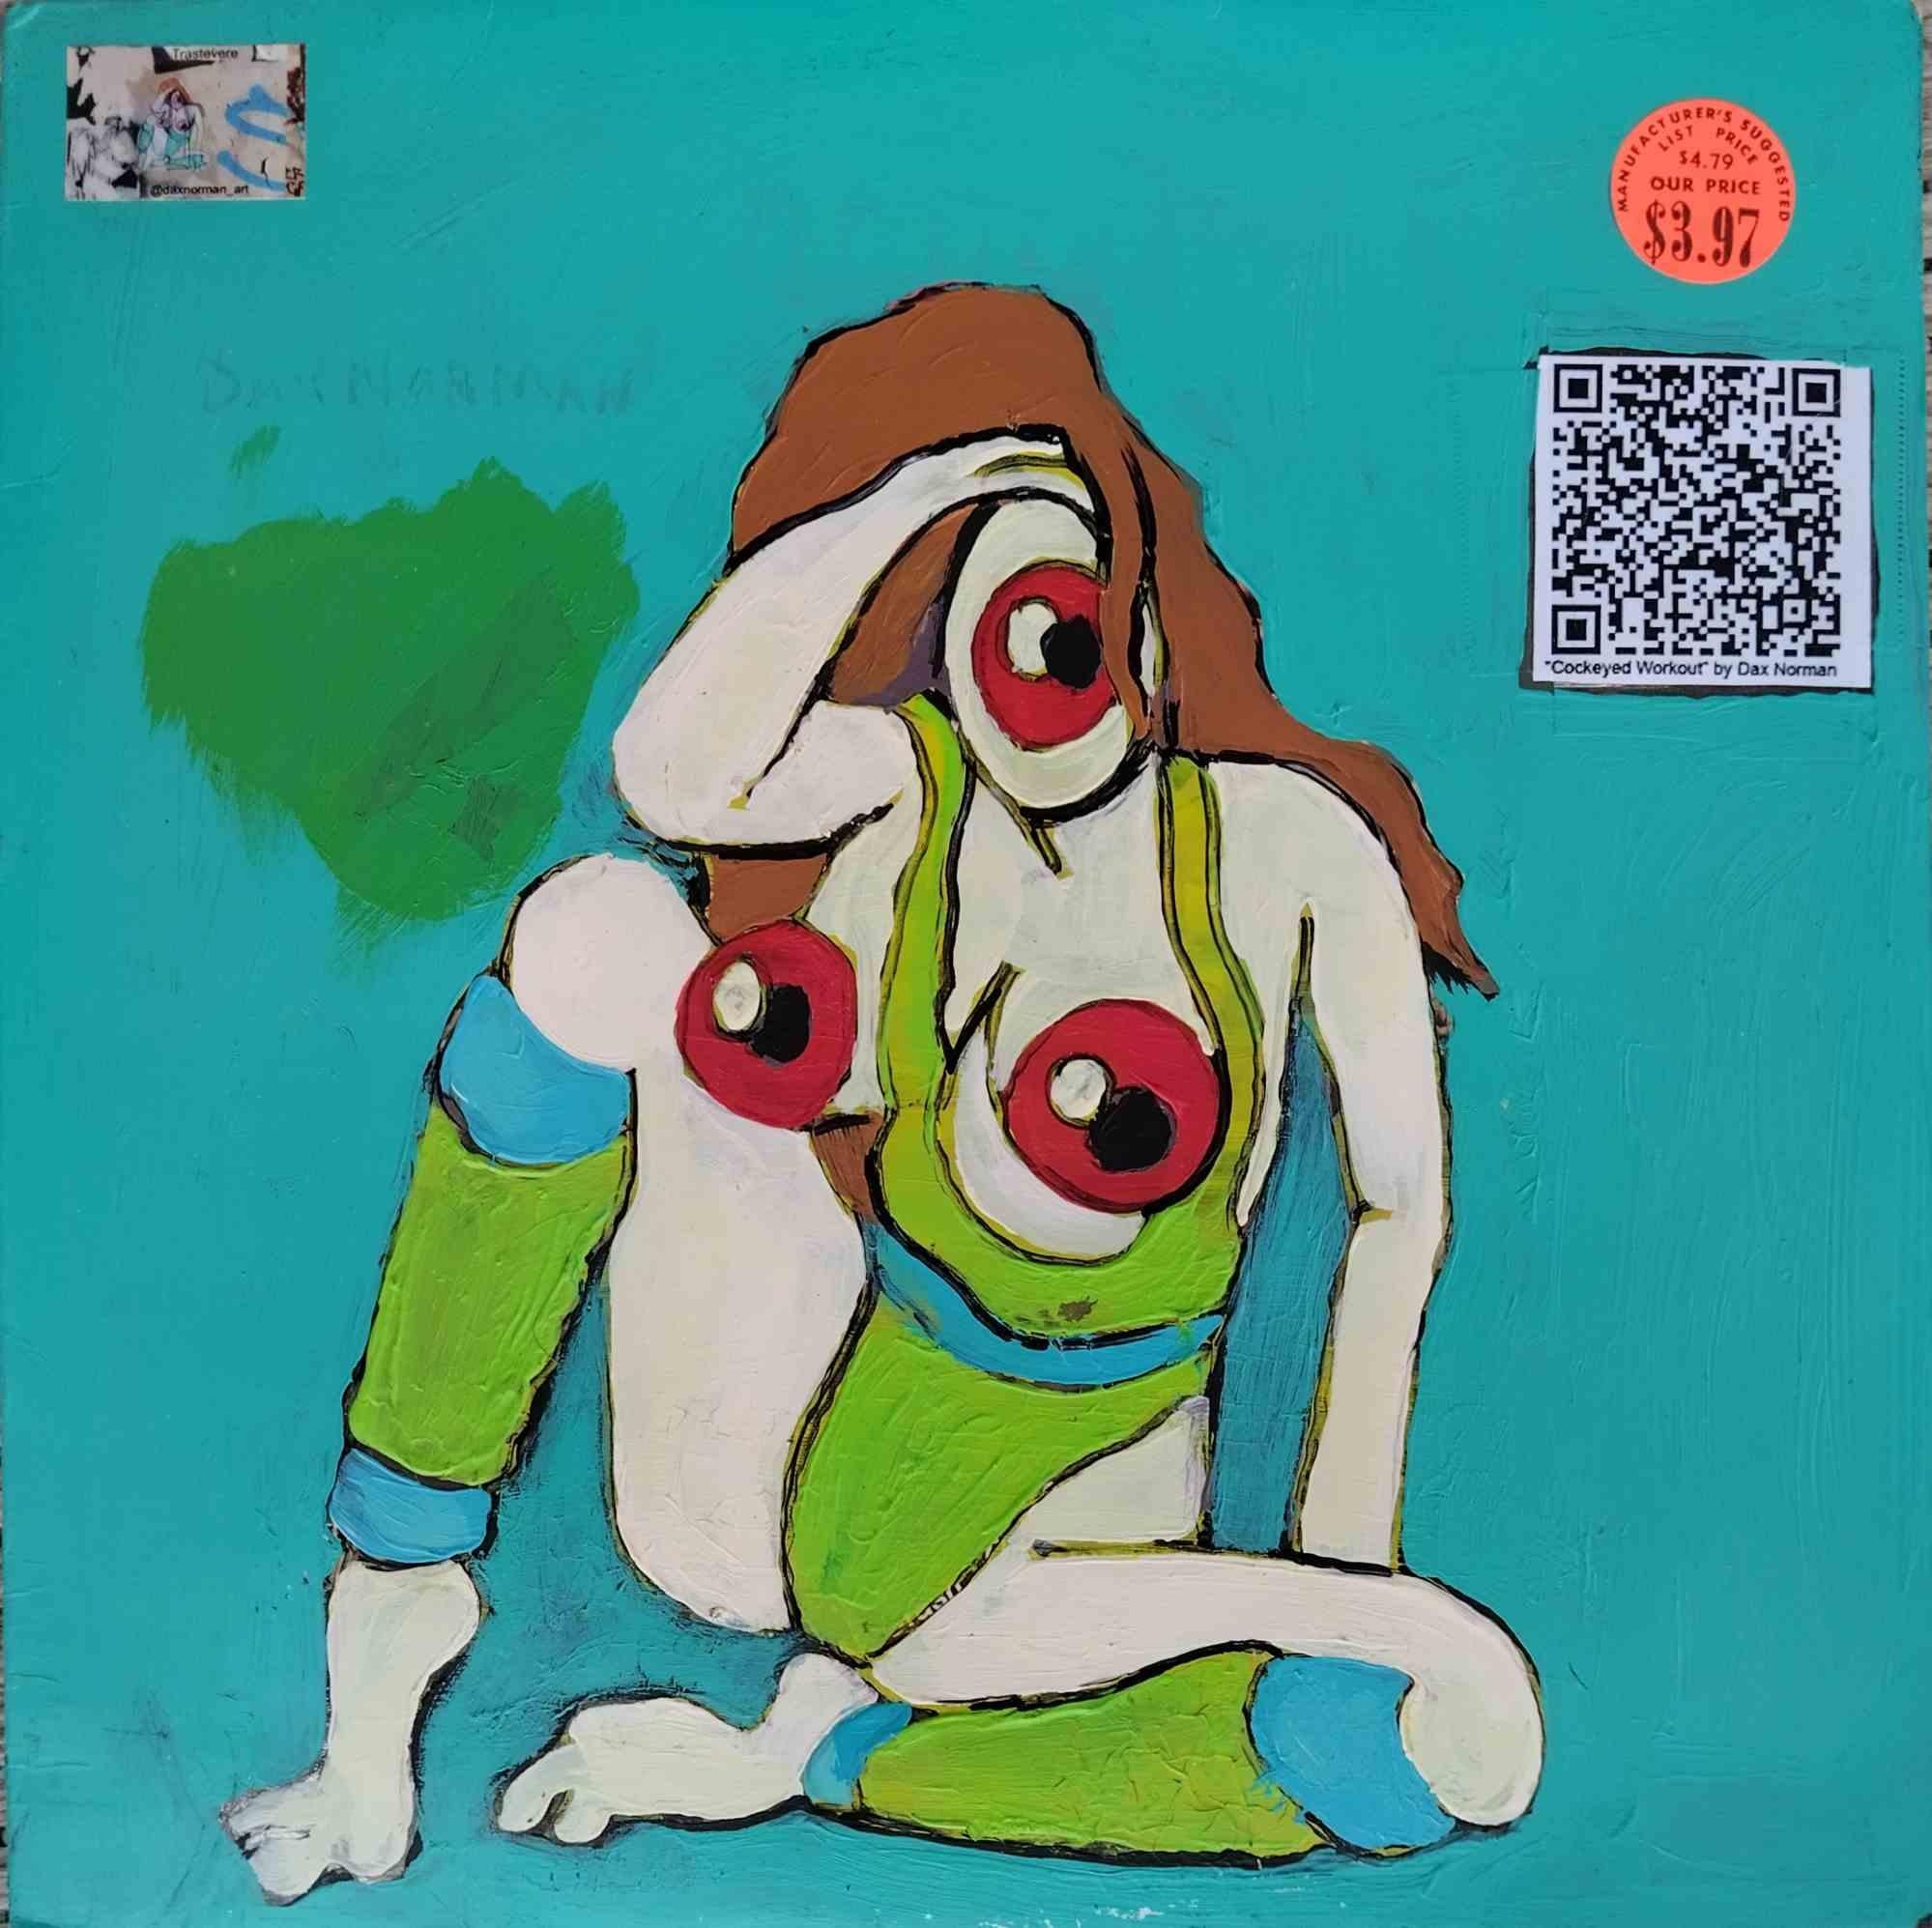 Cockeyed Workout (frame 08) is an acrylic painting on recycled record cover featured in Dax Norman's "Cinema Graffiti" NFT collection. Hand-signed.

The works in this collection of paintings blur the lines between the physical and digital, and